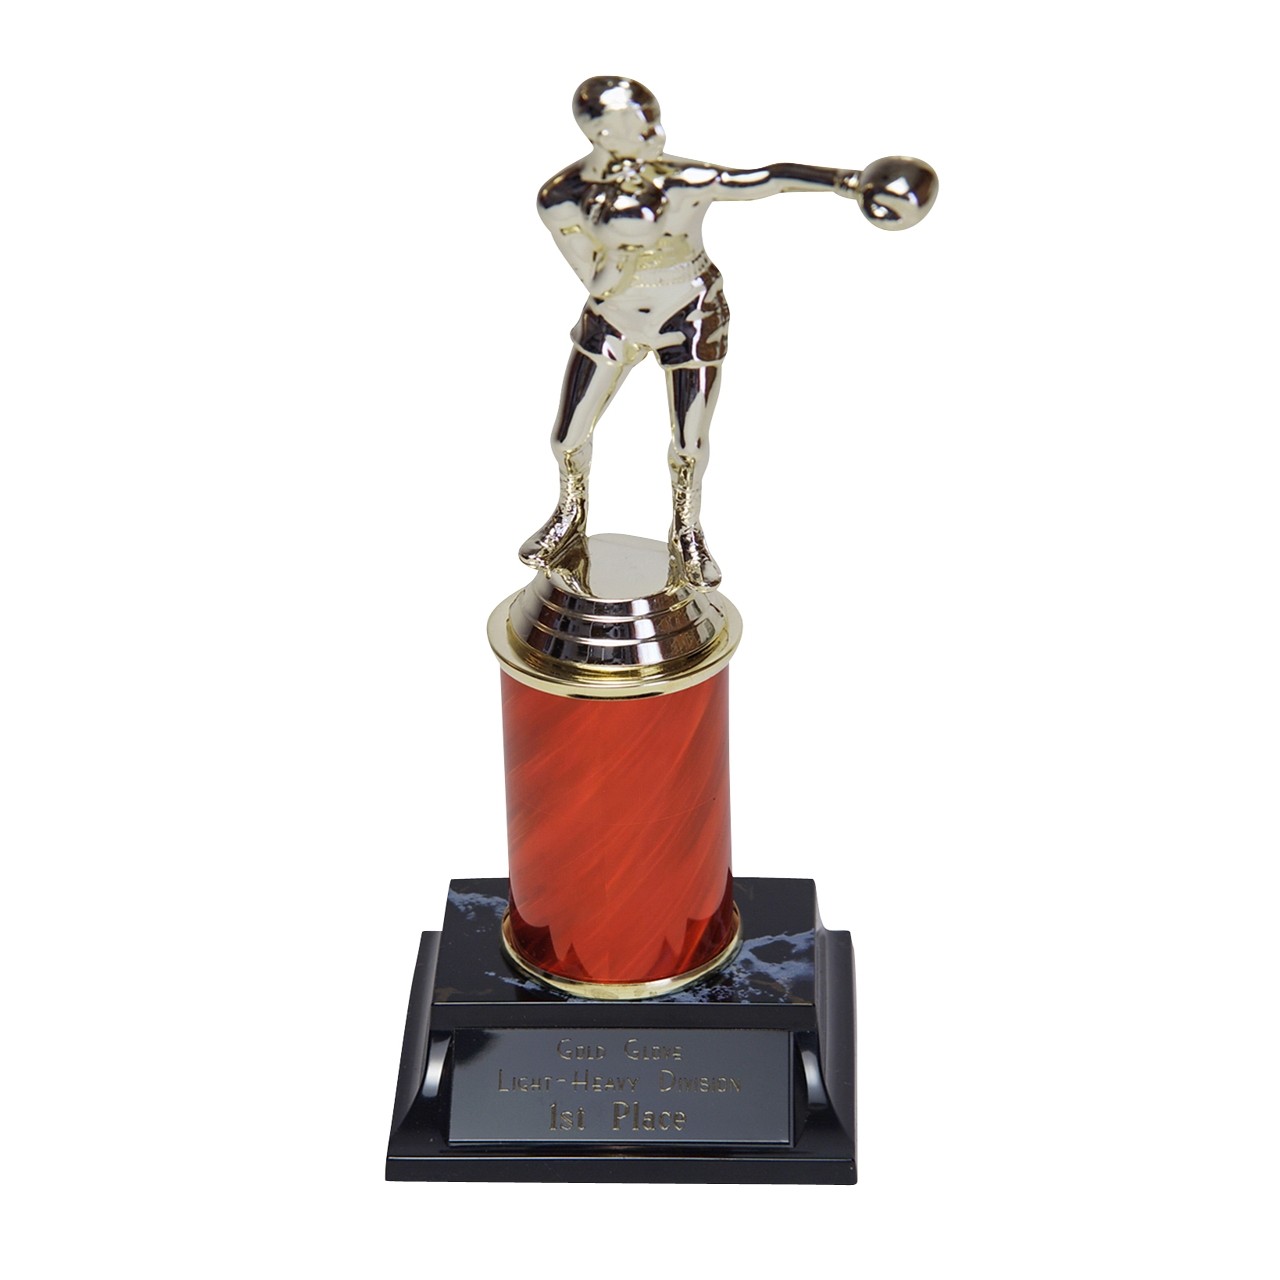 Boxing Trophies Resin Boxing Figure Trophy Awards 3 sizes FREE Engraving 